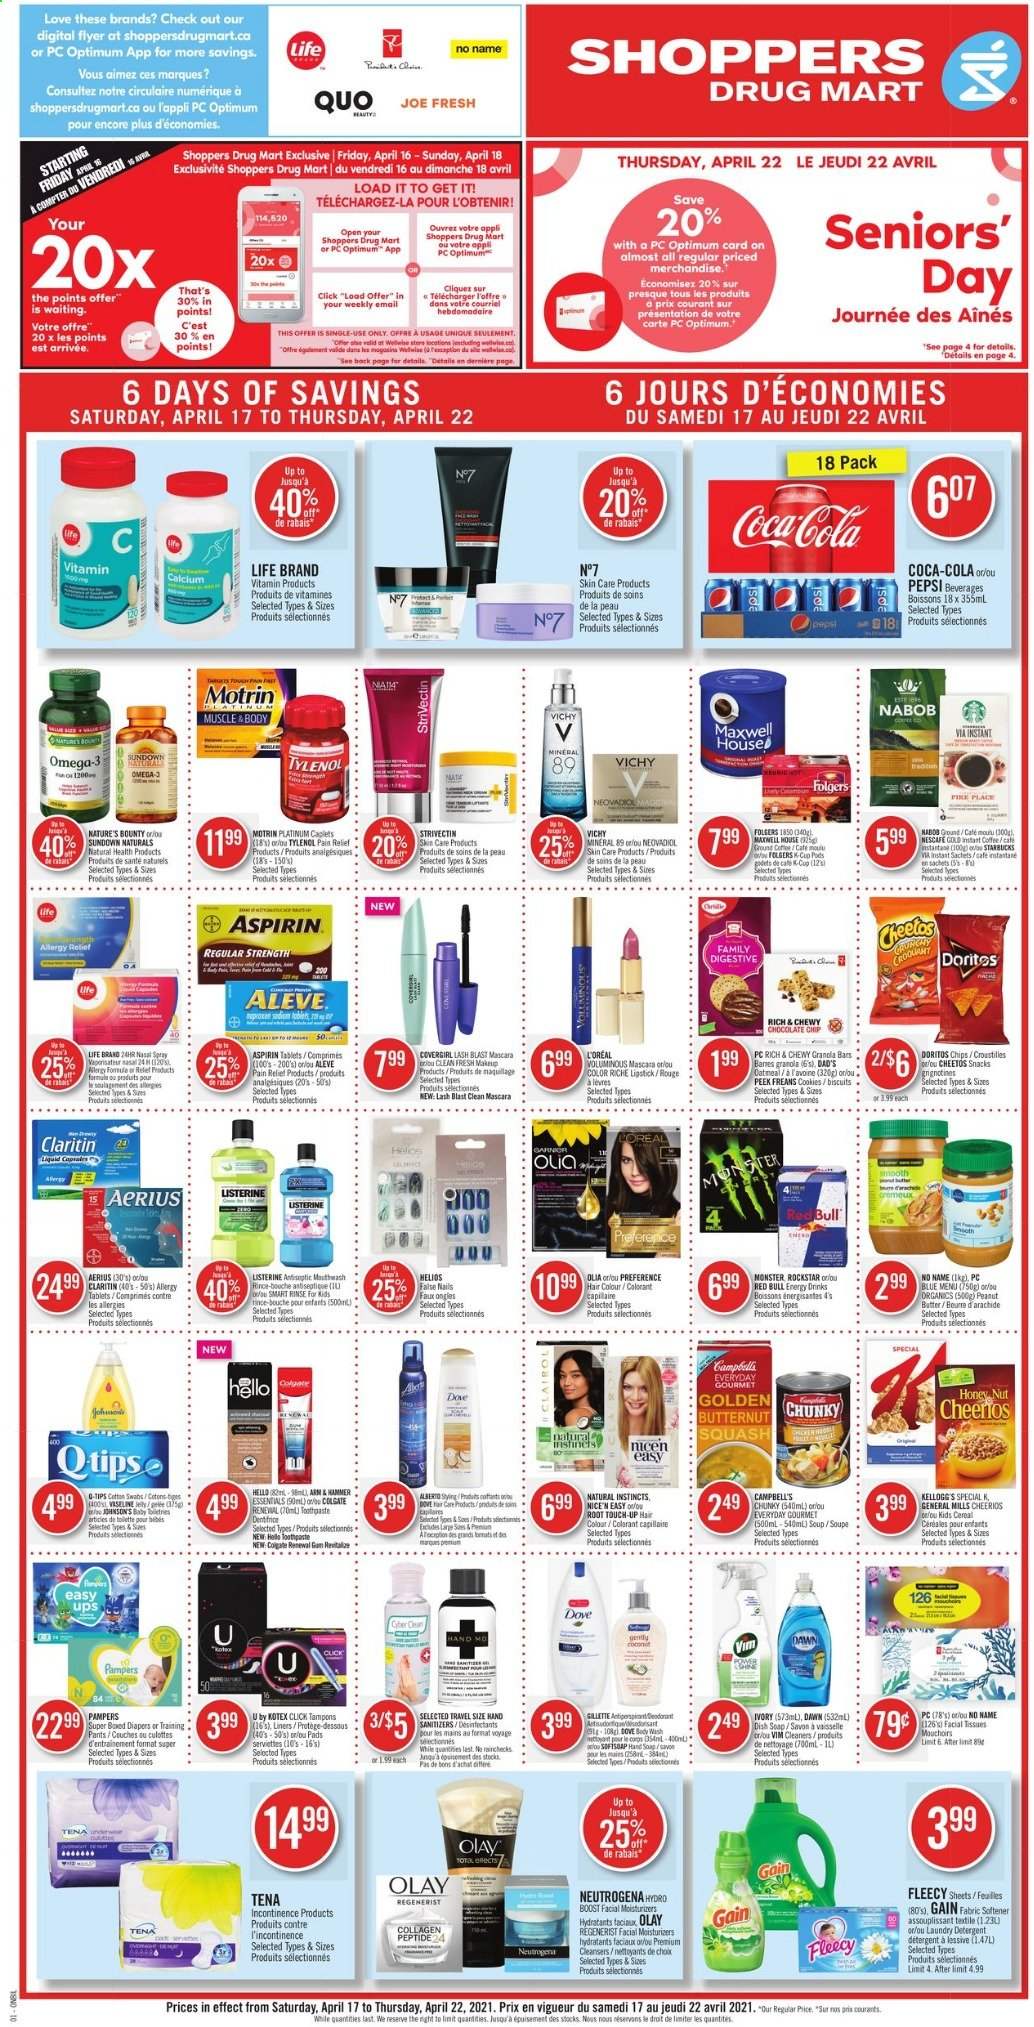 thumbnail - Shoppers Drug Mart Flyer - April 17, 2021 - April 22, 2021 - Sales products - cookies, snack, biscuit, Doritos, Cheetos, soup, cereals, Cheerios, honey, peanut butter, Coca-Cola, Pepsi, energy drink, Red Bull, Rockstar, Boost, instant coffee, Folgers, ground coffee, Starbucks, pants, nappies, Johnson's, baby pants, tissues, Gain, fabric softener, laundry detergent, Vichy, soap, toothpaste, mouthwash, Kotex, tampons, facial tissues, L’Oréal, moisturizer, Olay, Root Touch-Up, hair color, anti-perspirant, makeup, pain relief, Aleve, Nature's Bounty, Tylenol, Omega-3, aspirin, allergy relief, Motrin, Gillette, granola, Listerine, mascara, Neutrogena, Pampers, chips, Nescafé. Page 1.